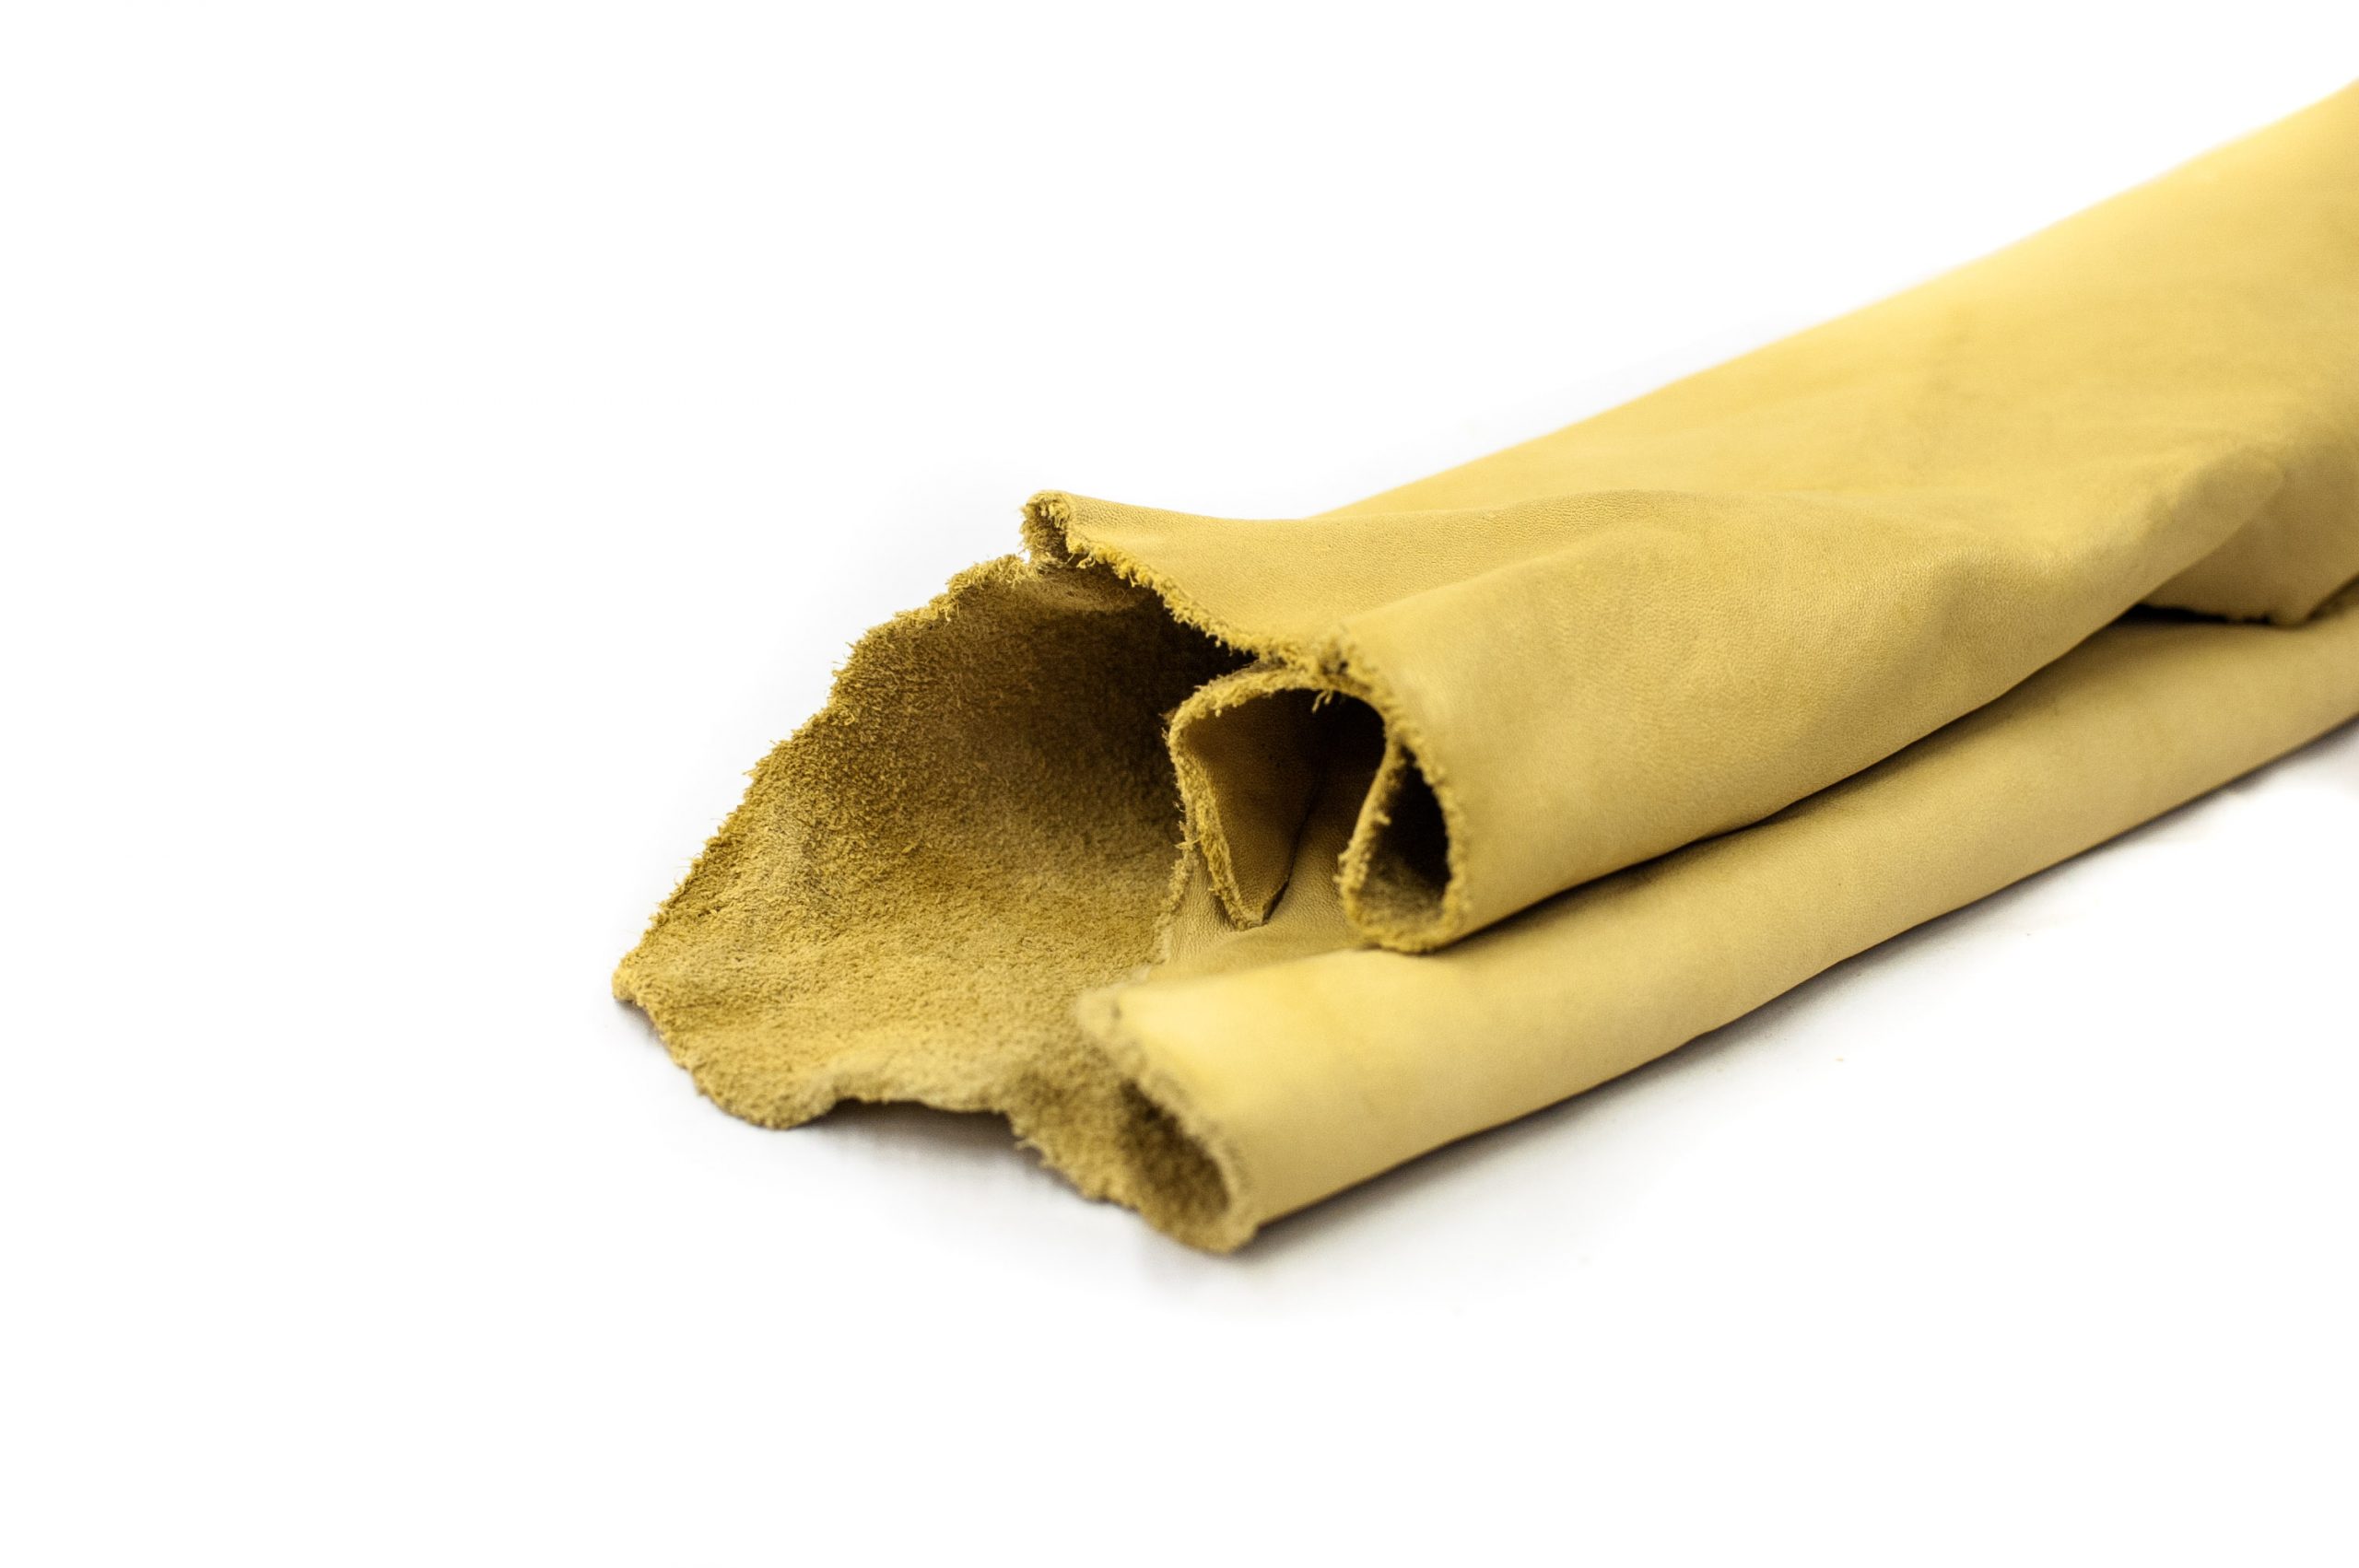 Light Yellow Cow Lining Leather - $2.25 to $4.25 per square foot